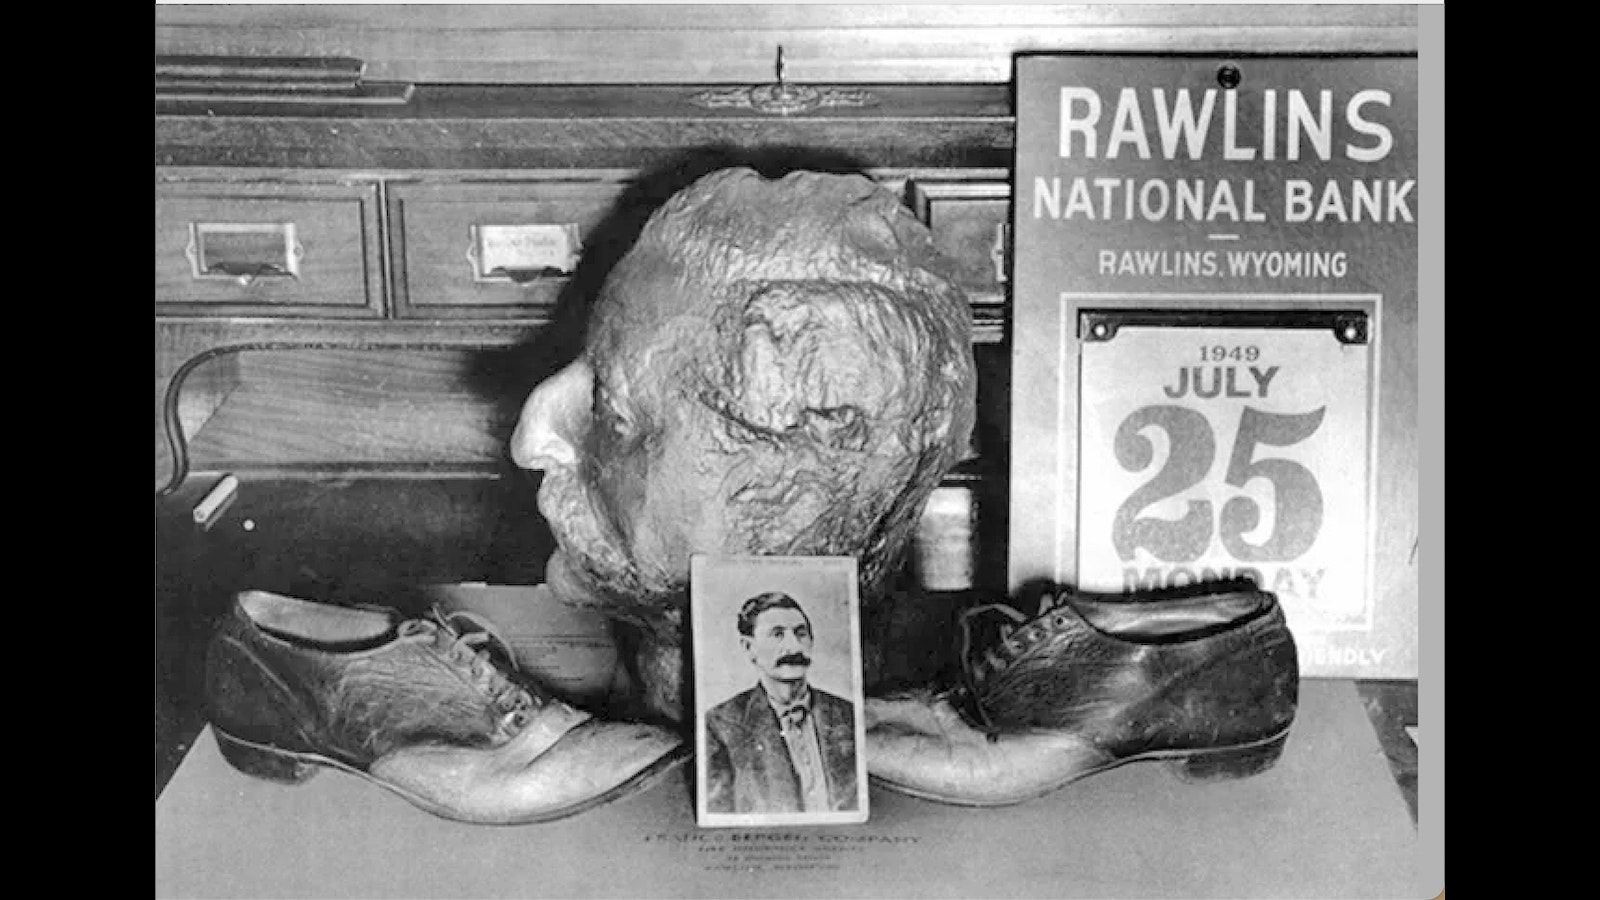 Memorabilia once displayed at the Rawlins Bank in 1949.